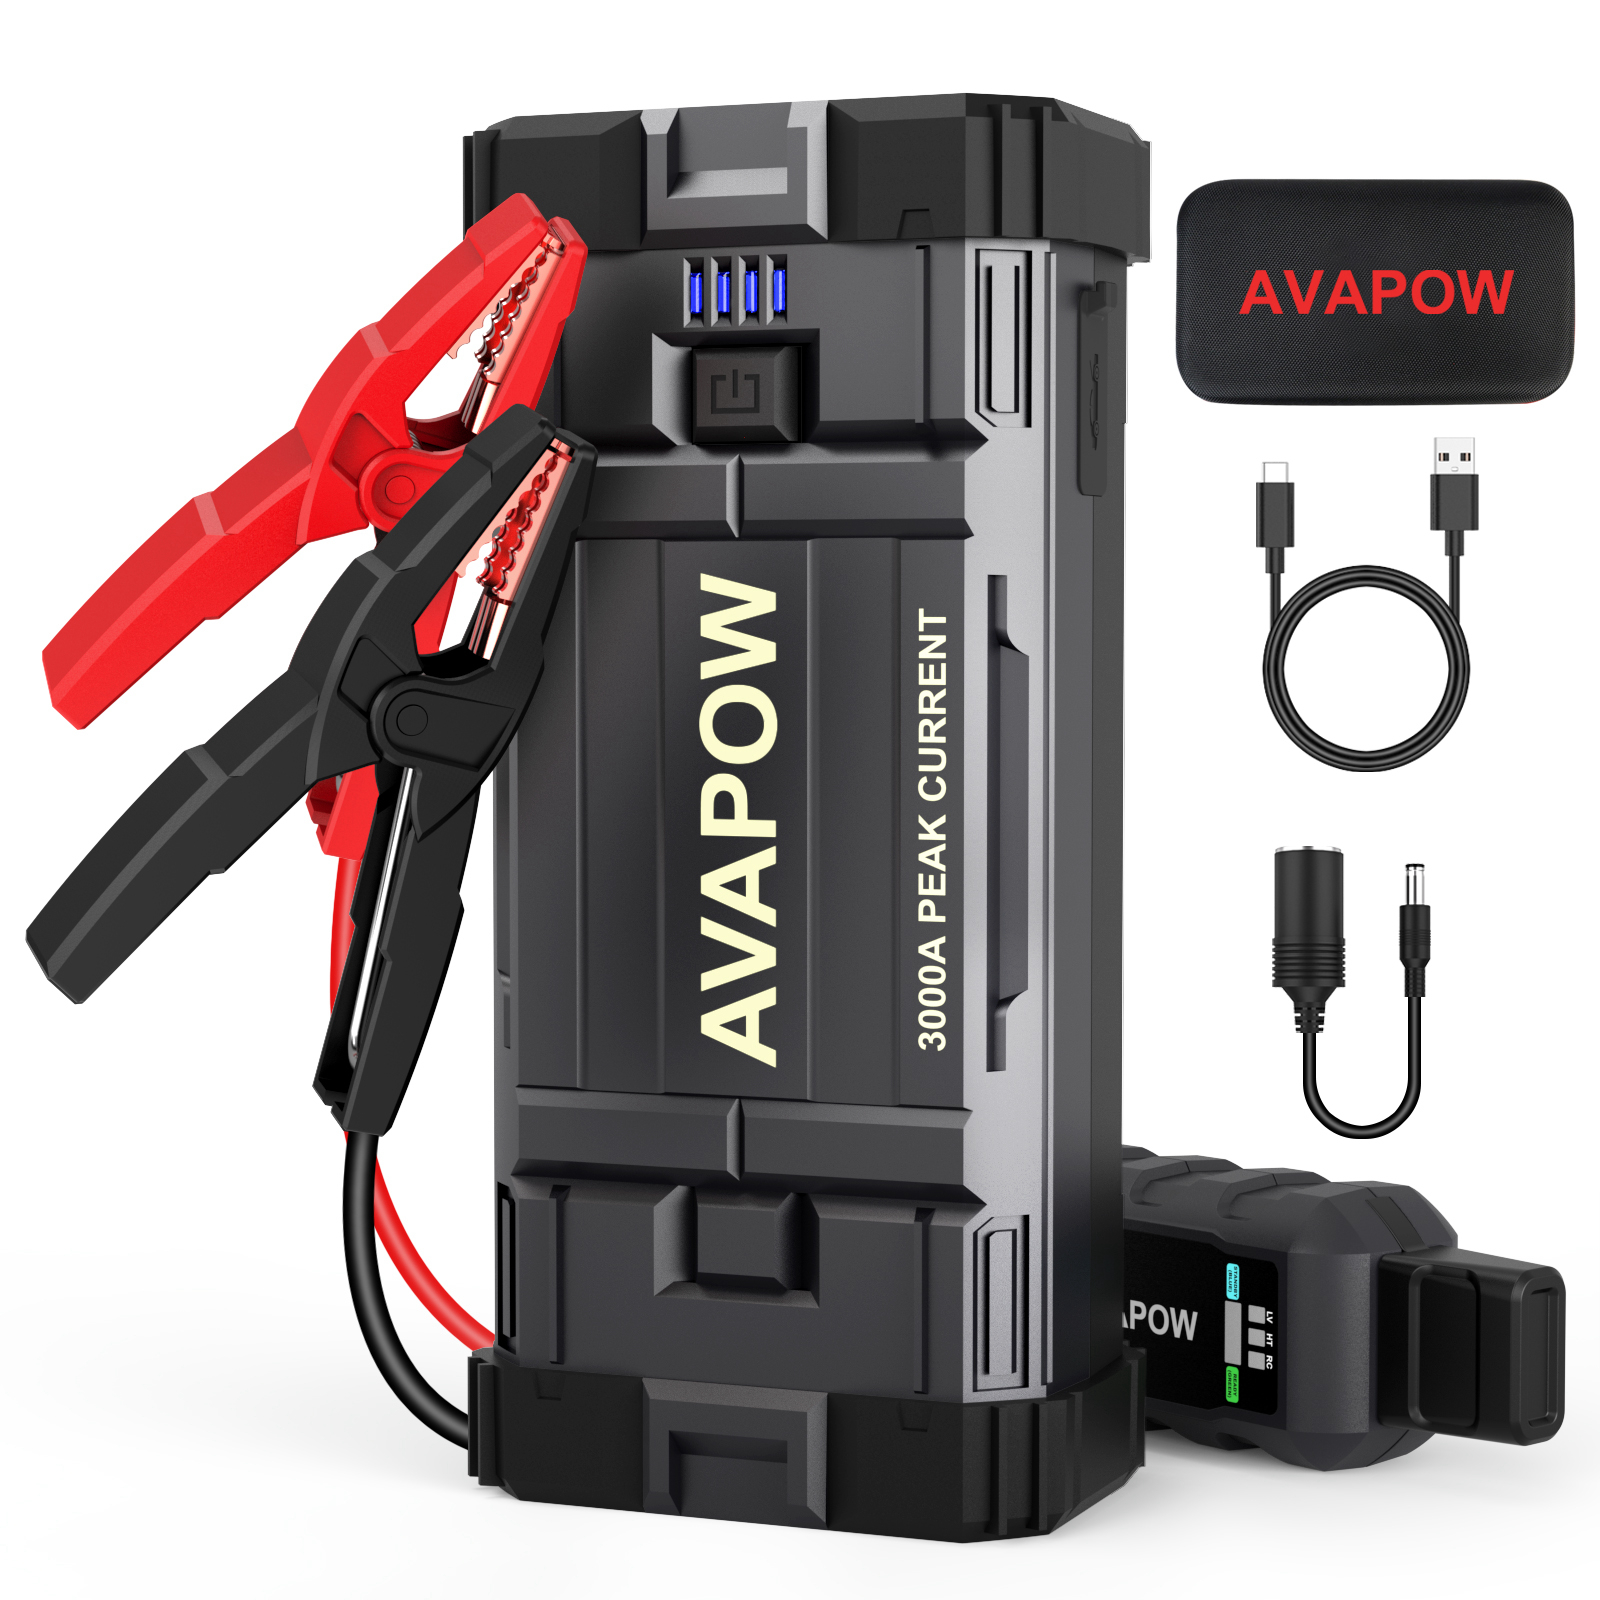 AVAPOW Car Battery Jump Starter ,3000A Peak Portable Jump Starters for Up to 8L Gas 8L Diesel Engine with Booster Function,12V Lithium Jump Charger Pack Box with Smart Safety Clamp - image 1 of 8